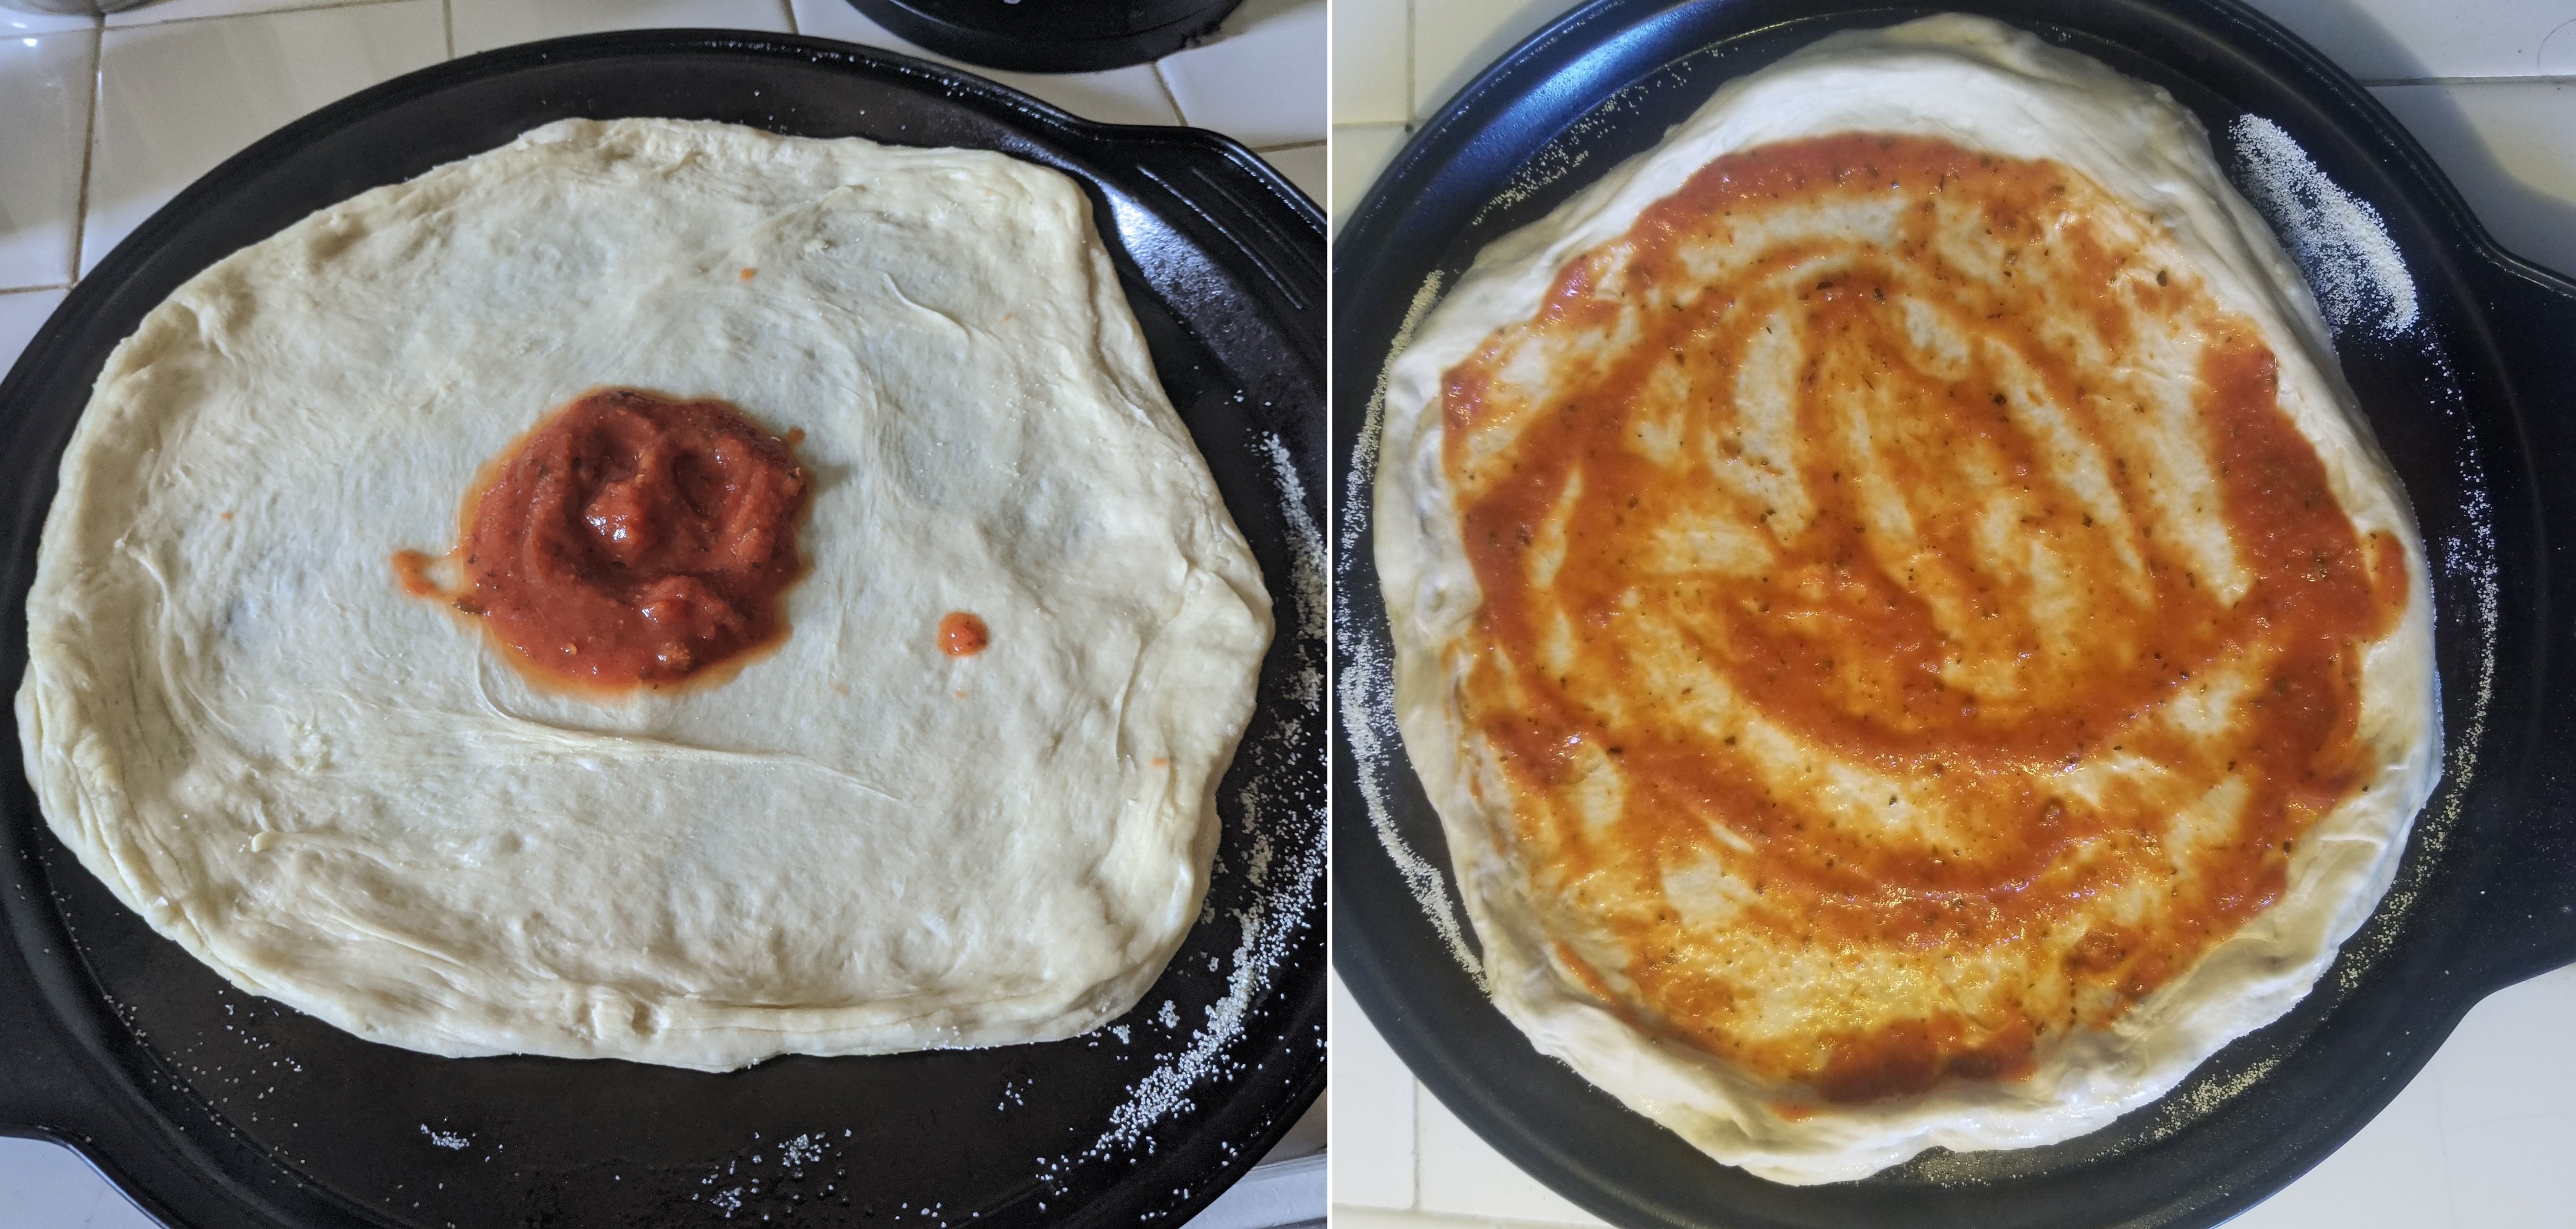 2 pictures side-by-side.  Pic 1 is Raw pizza dough on a round pan with a few spoonfuls of tomato sauce in the center.  Pic 2 is Raw pizza dough on a round pan with a tomato sauce spread across the dough.